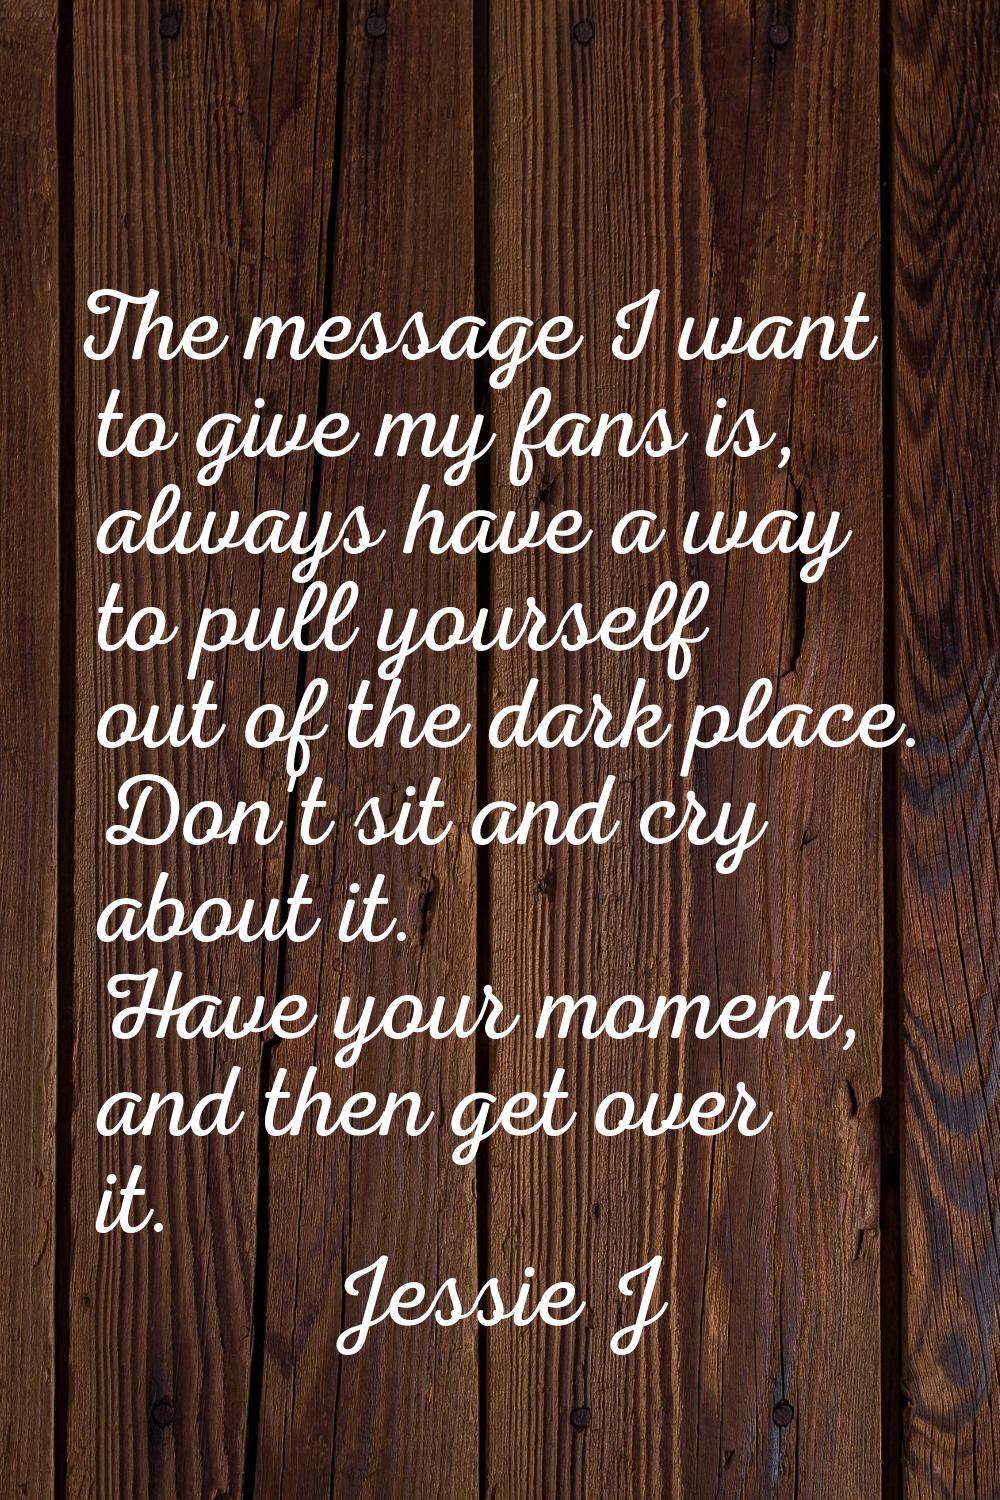 The message I want to give my fans is, always have a way to pull yourself out of the dark place. Do